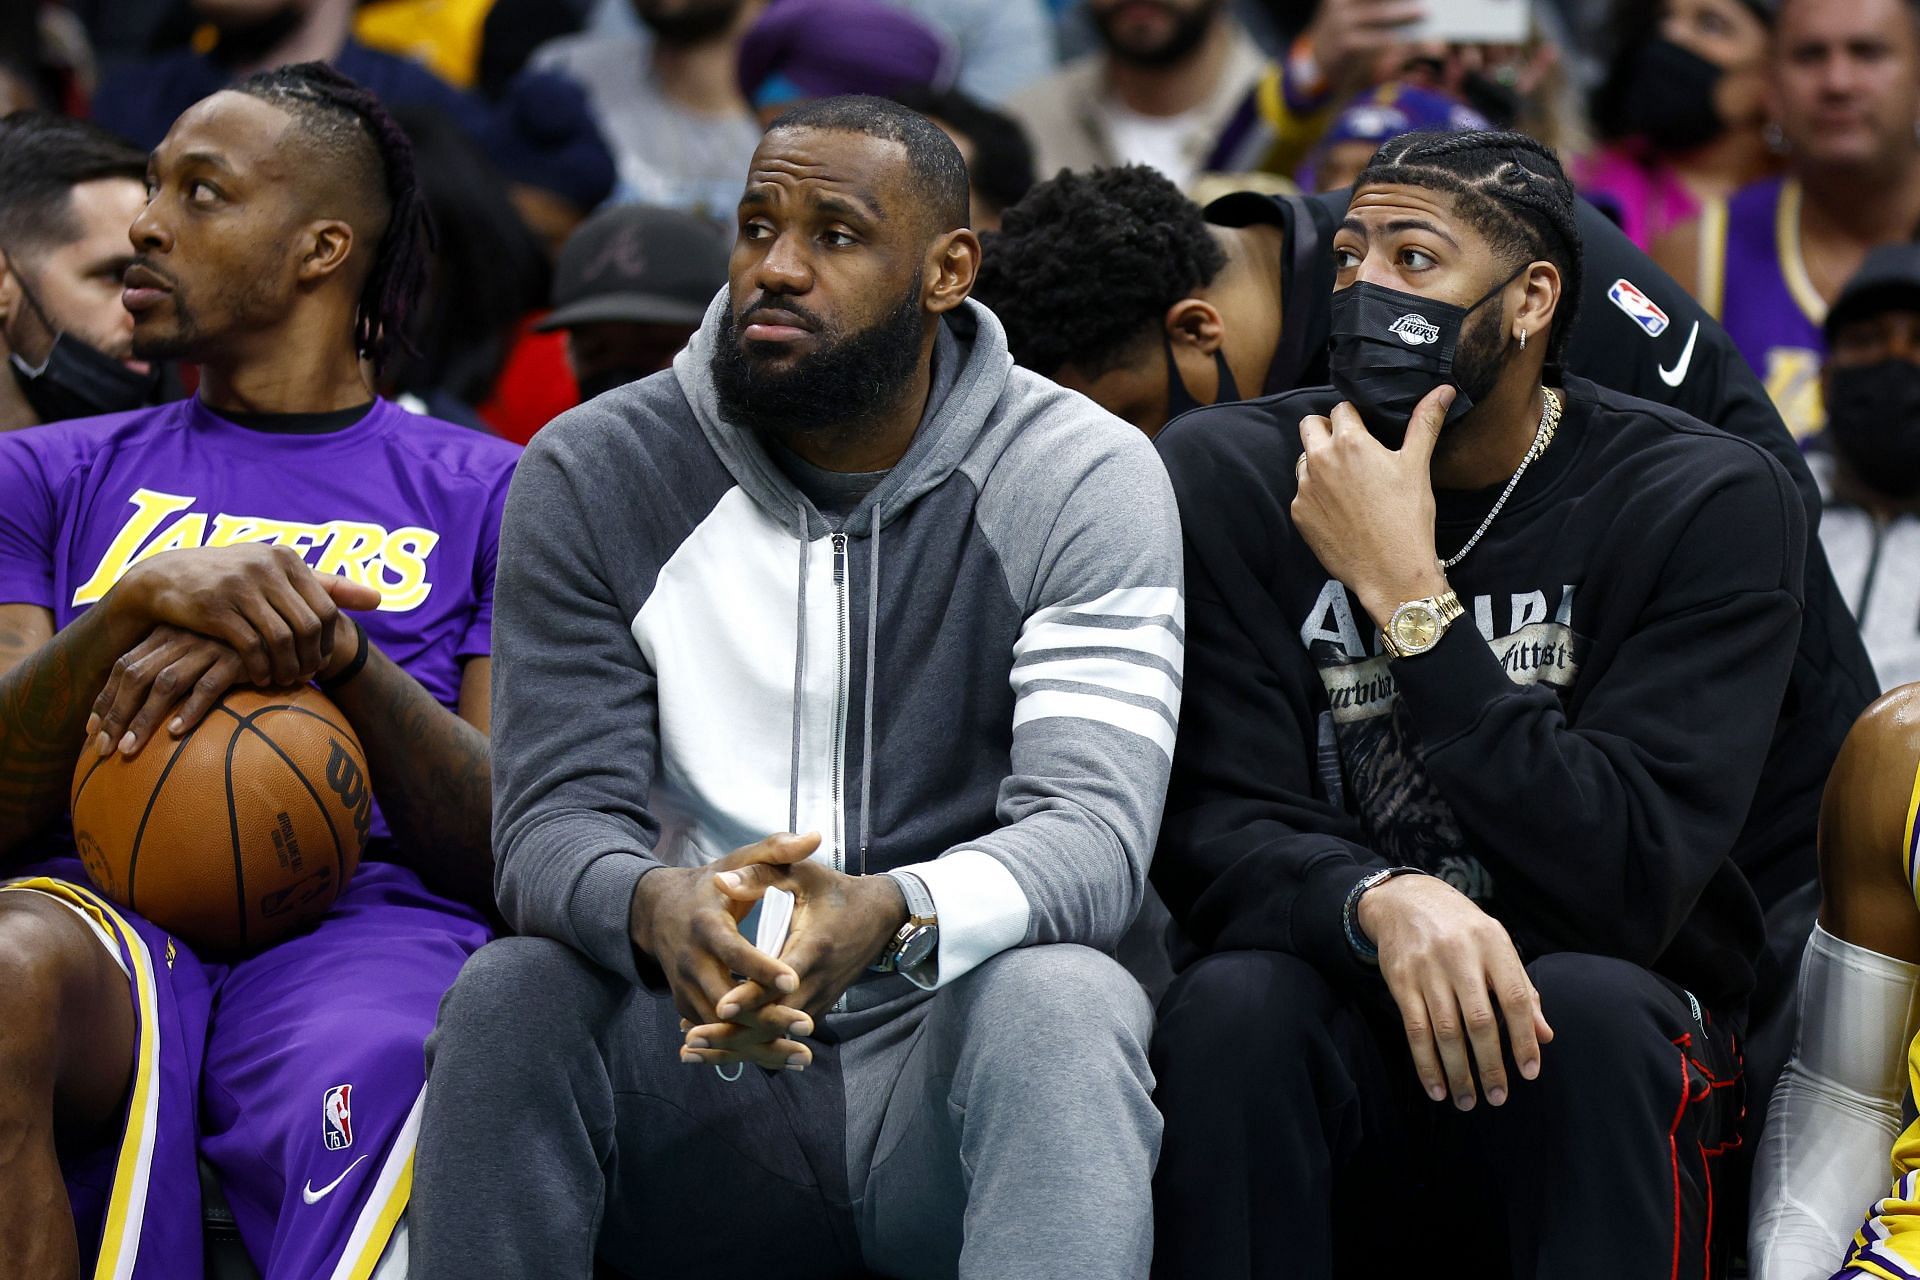 Dwight Howard, LeBron James and Anthony Davis of the LA Lakers.